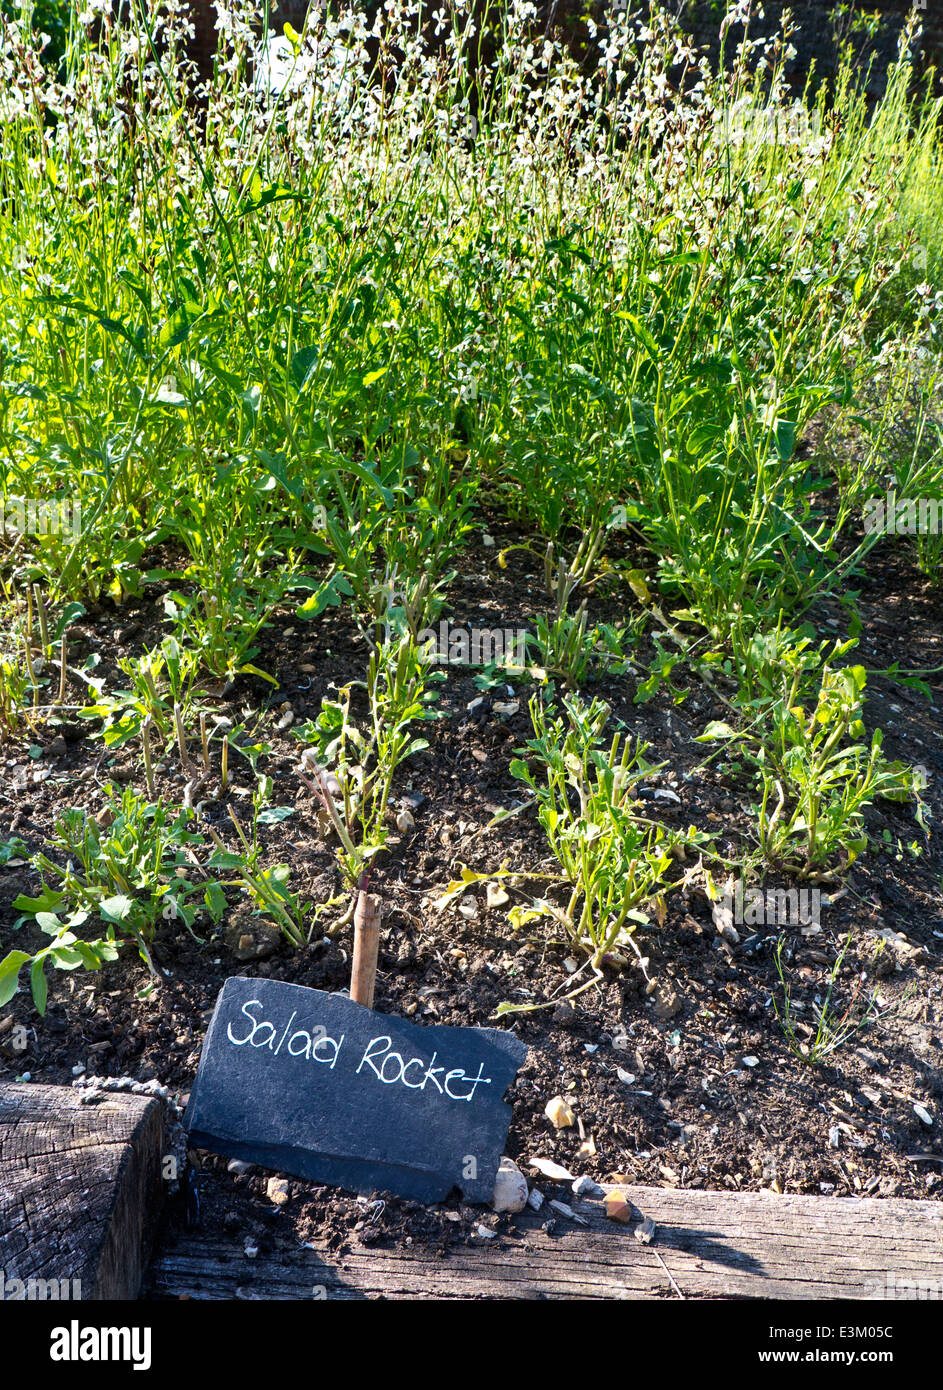 Eruca sativa an edible annual plant, known as Salad Rocket growing in a kitchen garden with rustic slate name label in front Stock Photo